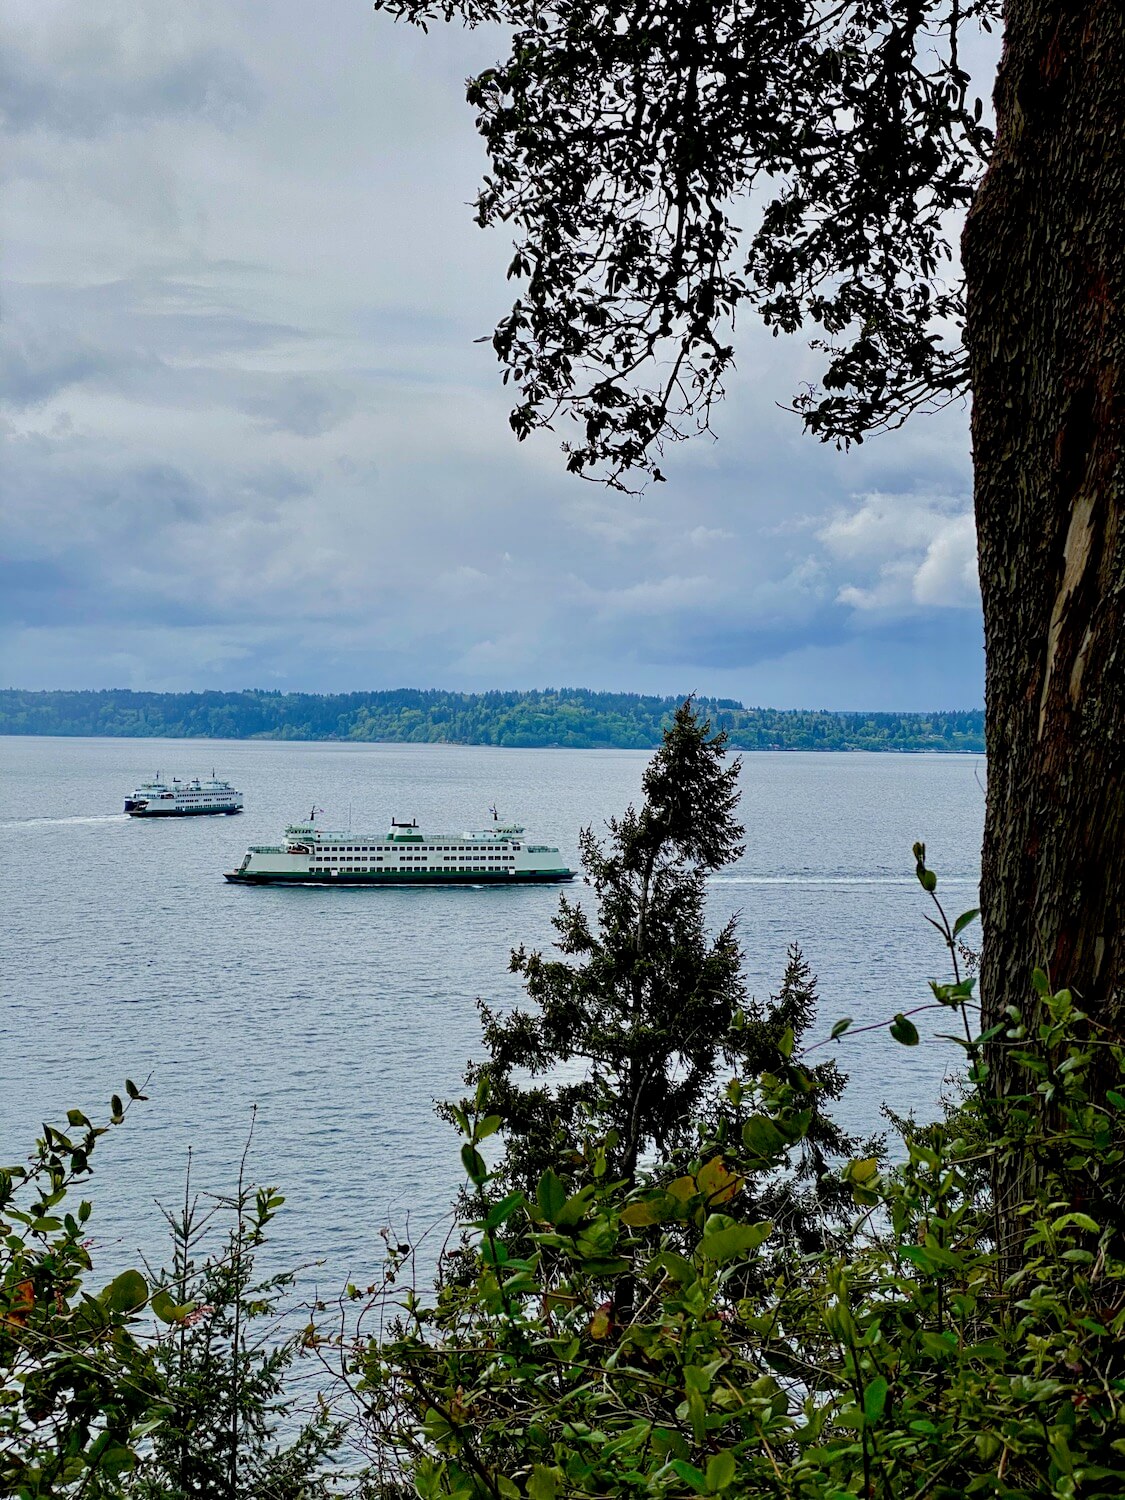 View from the bluff trail at Lincoln Park in West Seattle. Two ferries pass each other in the distant Puget Sound and Vashon Island can be seen in the distance.